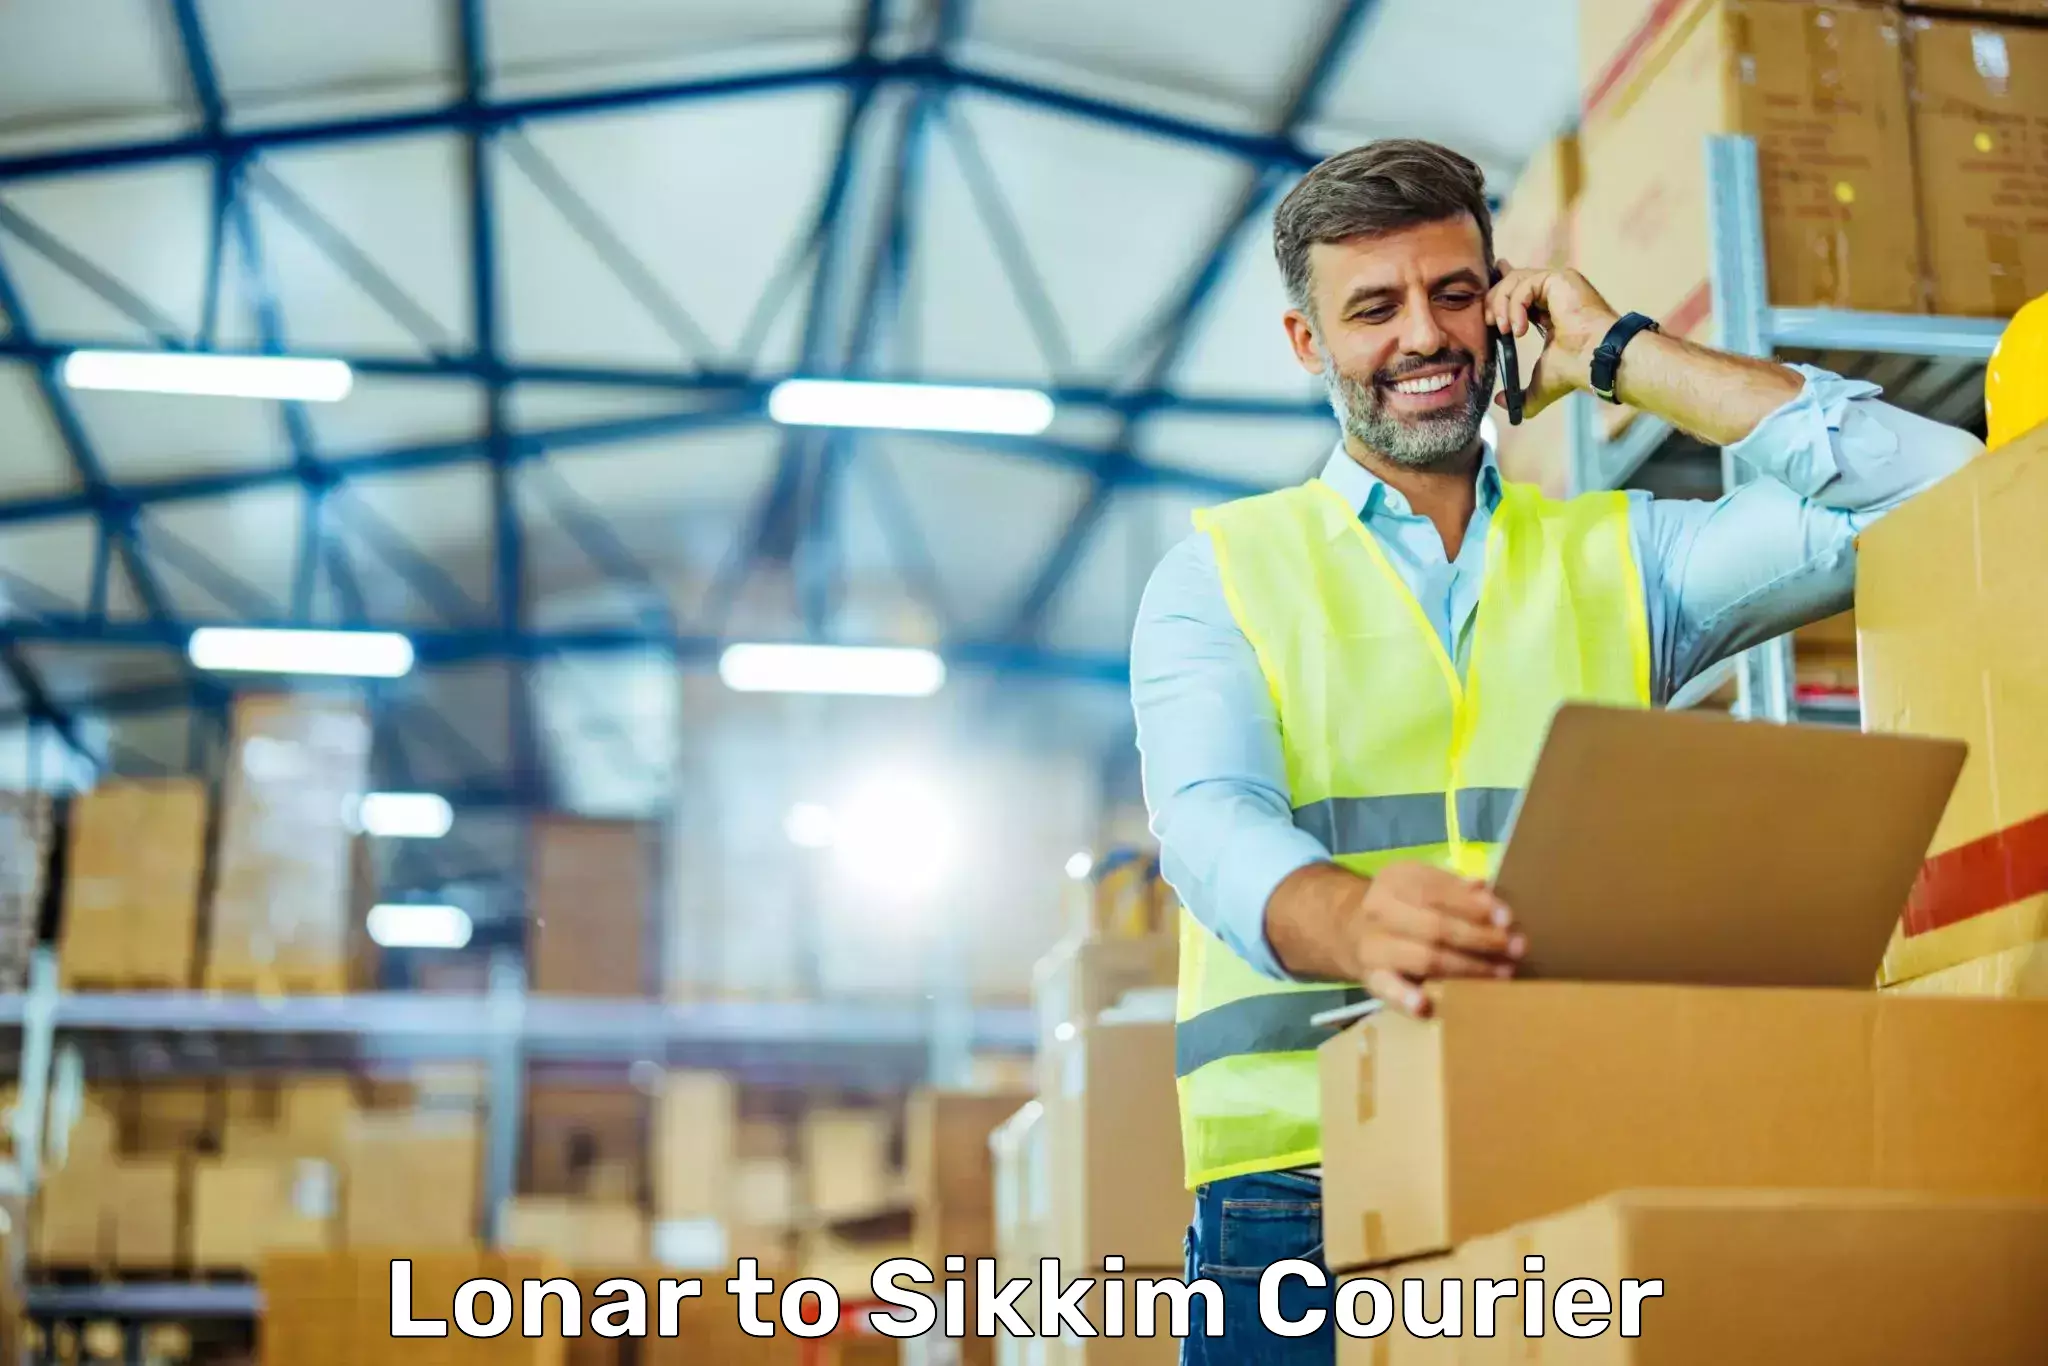 Same-day delivery solutions Lonar to Pelling